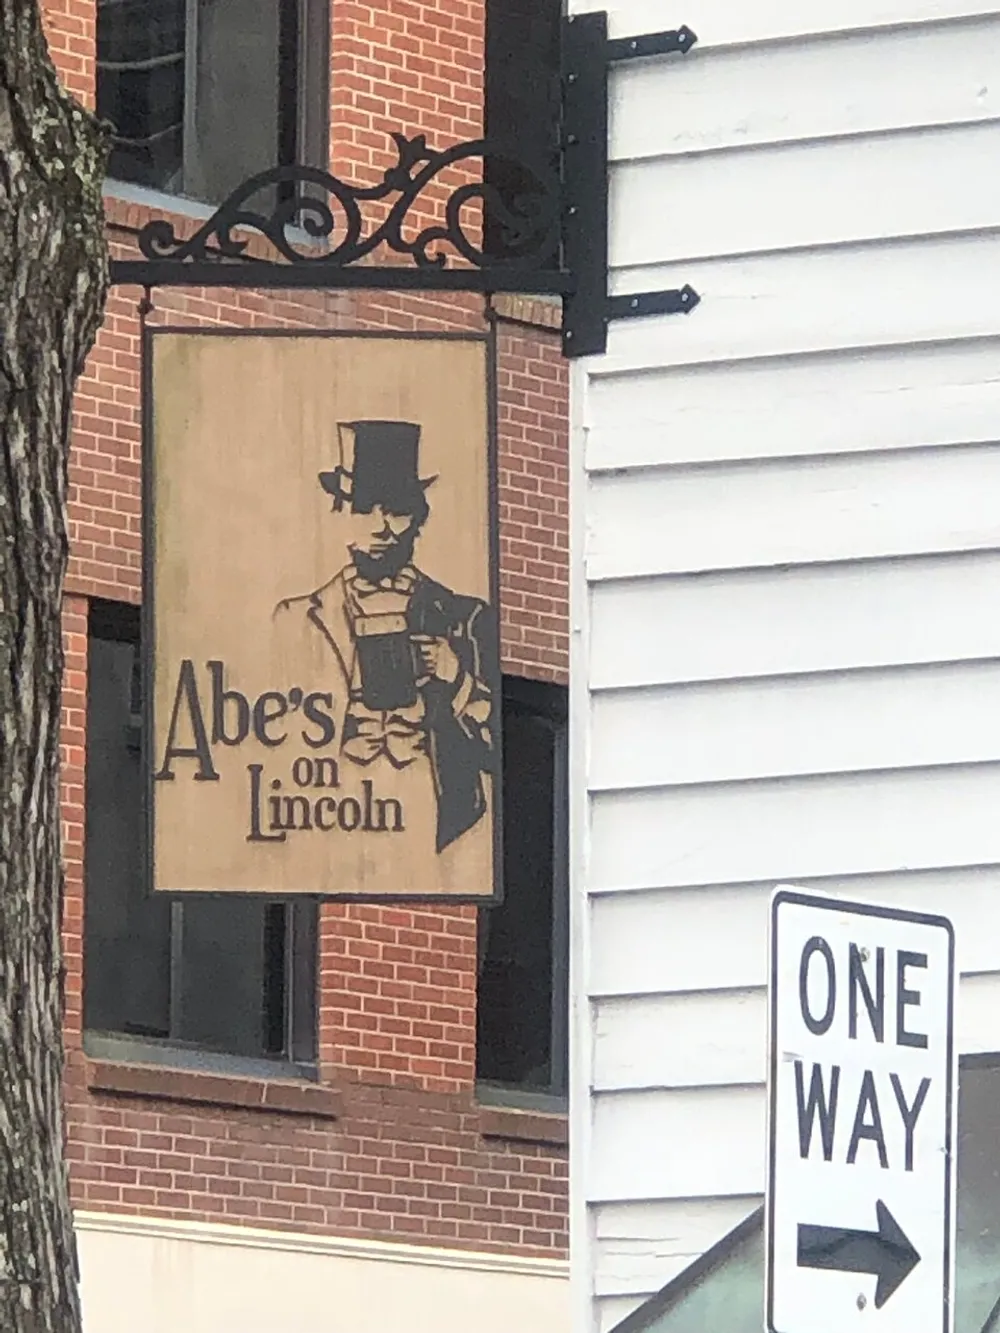 The image features a sign depicting a figure resembling Abraham Lincoln holding a drink with the text Abes on Lincoln above a one-way street sign